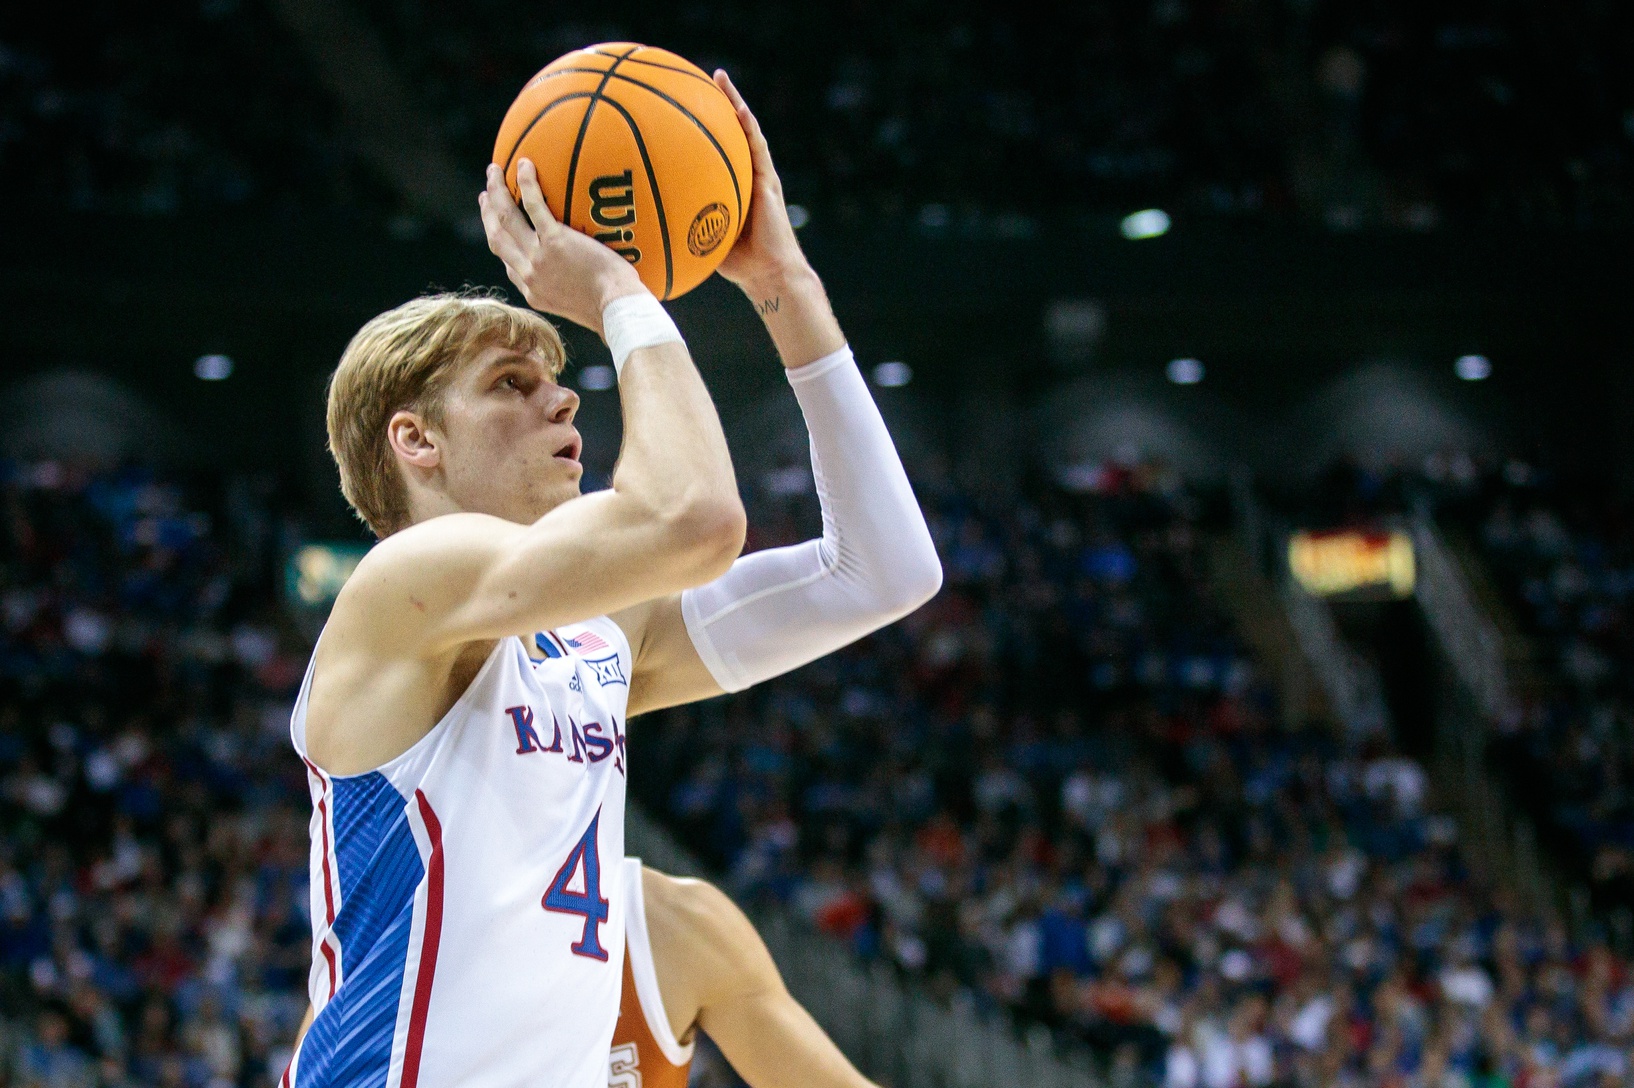 Mar 11, 2023; Kansas City, MO, USA; Kansas Jayhawks guard Gradey Dick (4) shoots the ball during the first half against the Texas Longhorns at T-Mobile Center. Mandatory Credit: William Purnell-USA TODAY Sports